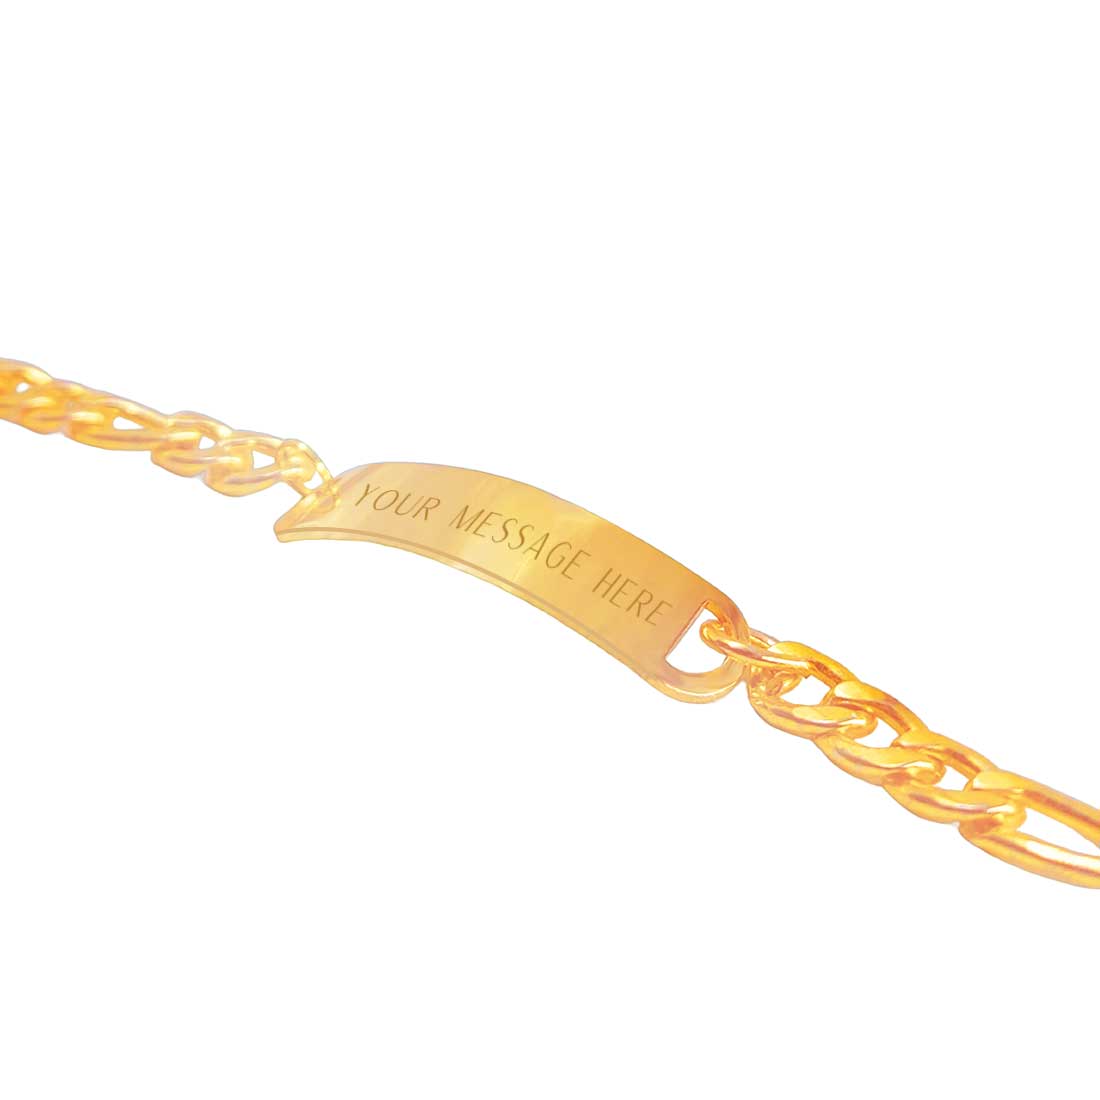 Buy WHP Jewellers Womens Divija Gold Bracelets, 22Kt (916) Bis Hallmark  Pure Gold, Accessories, Suitable Birthday Gift Friend, Special Bracelet at  Amazon.in